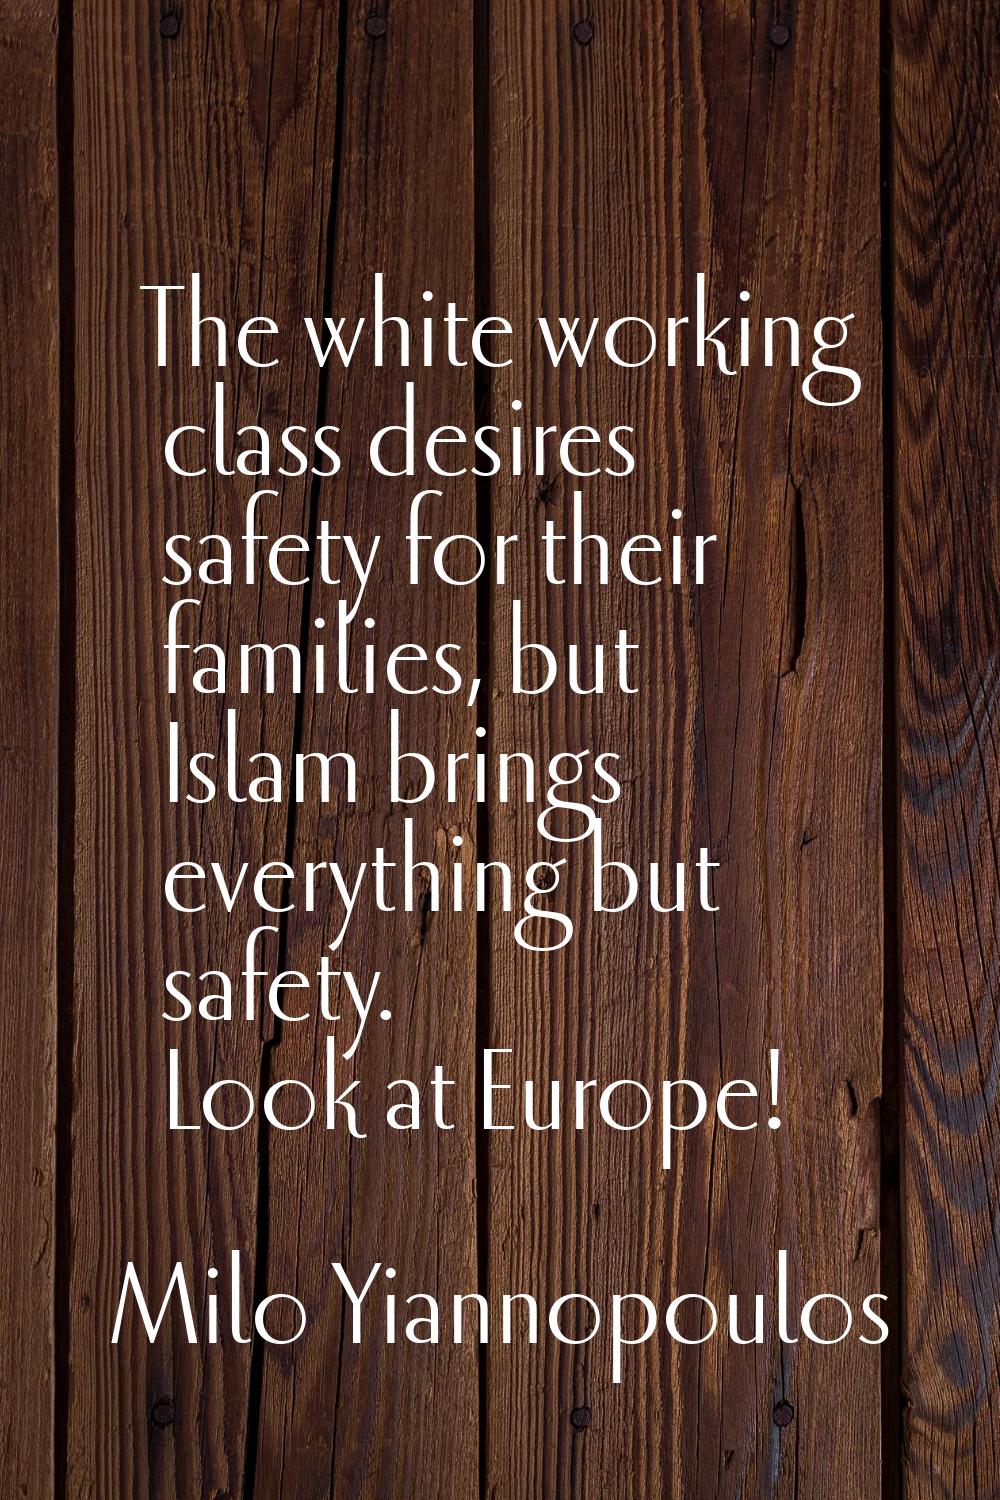 The white working class desires safety for their families, but Islam brings everything but safety. 